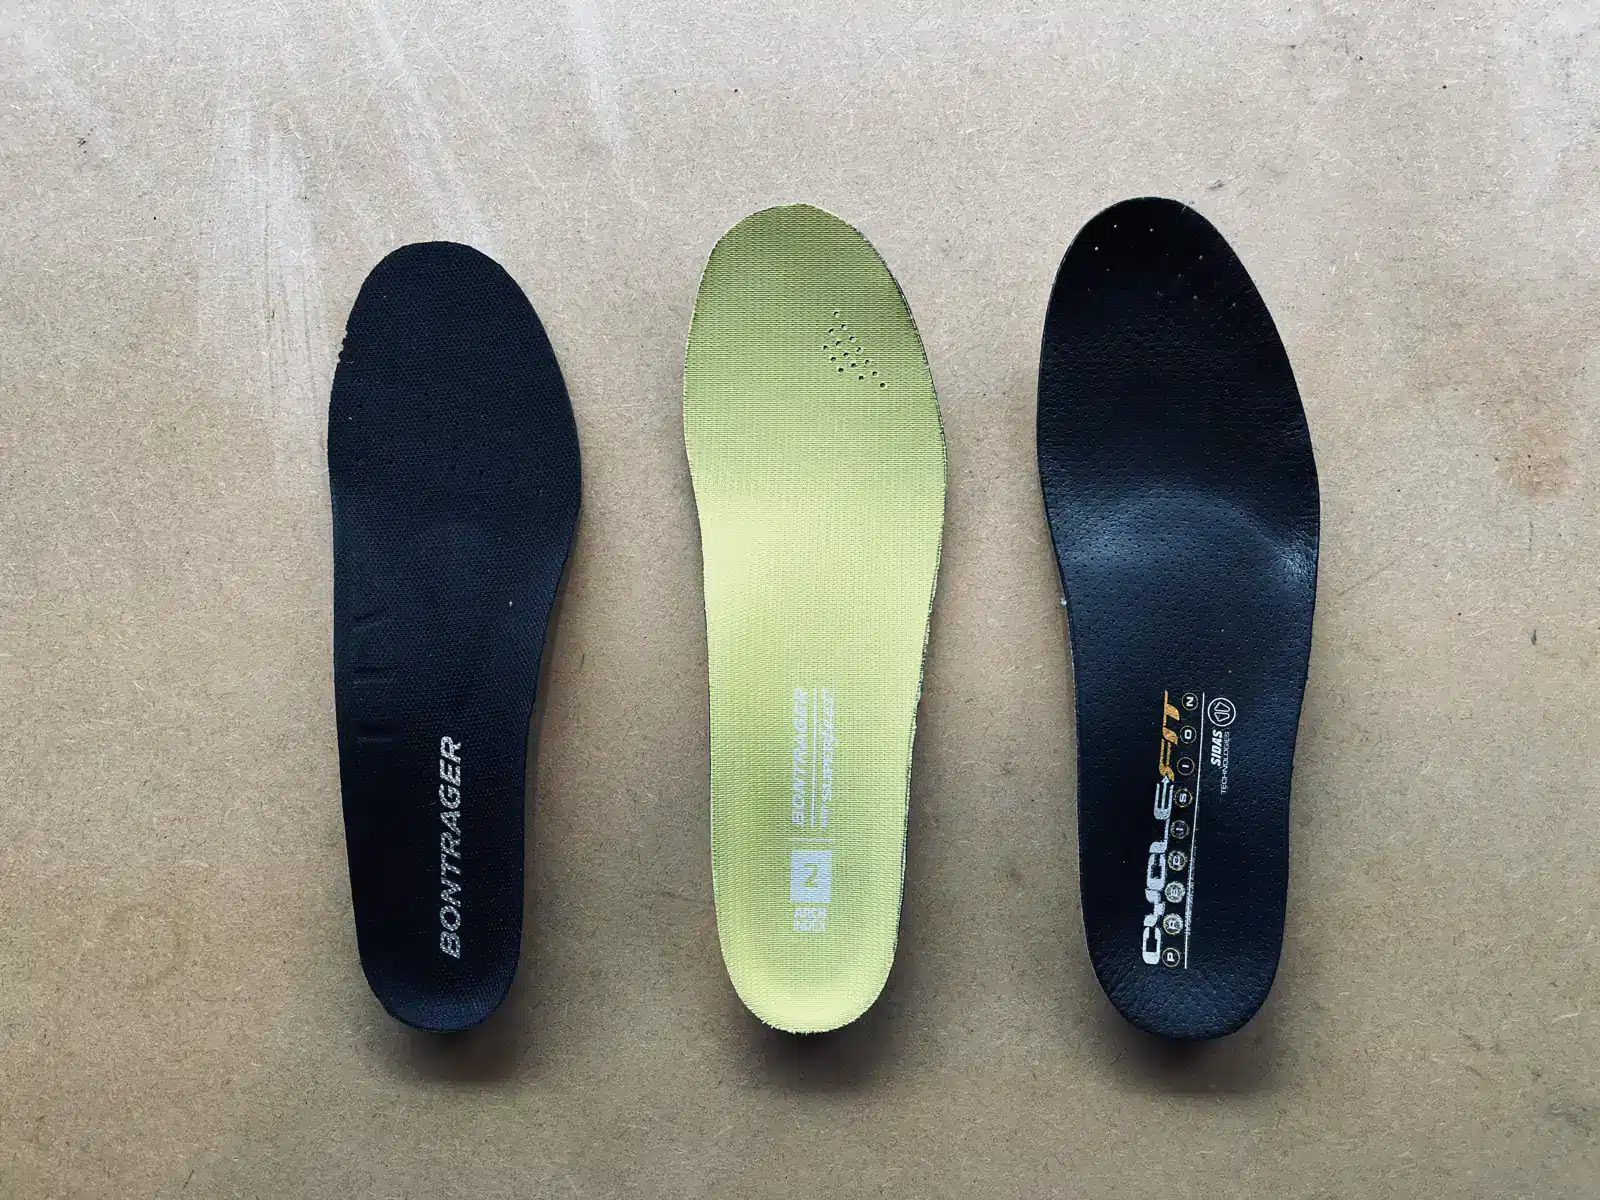 Three different types of shoe insoles laid out side by side on a surface.